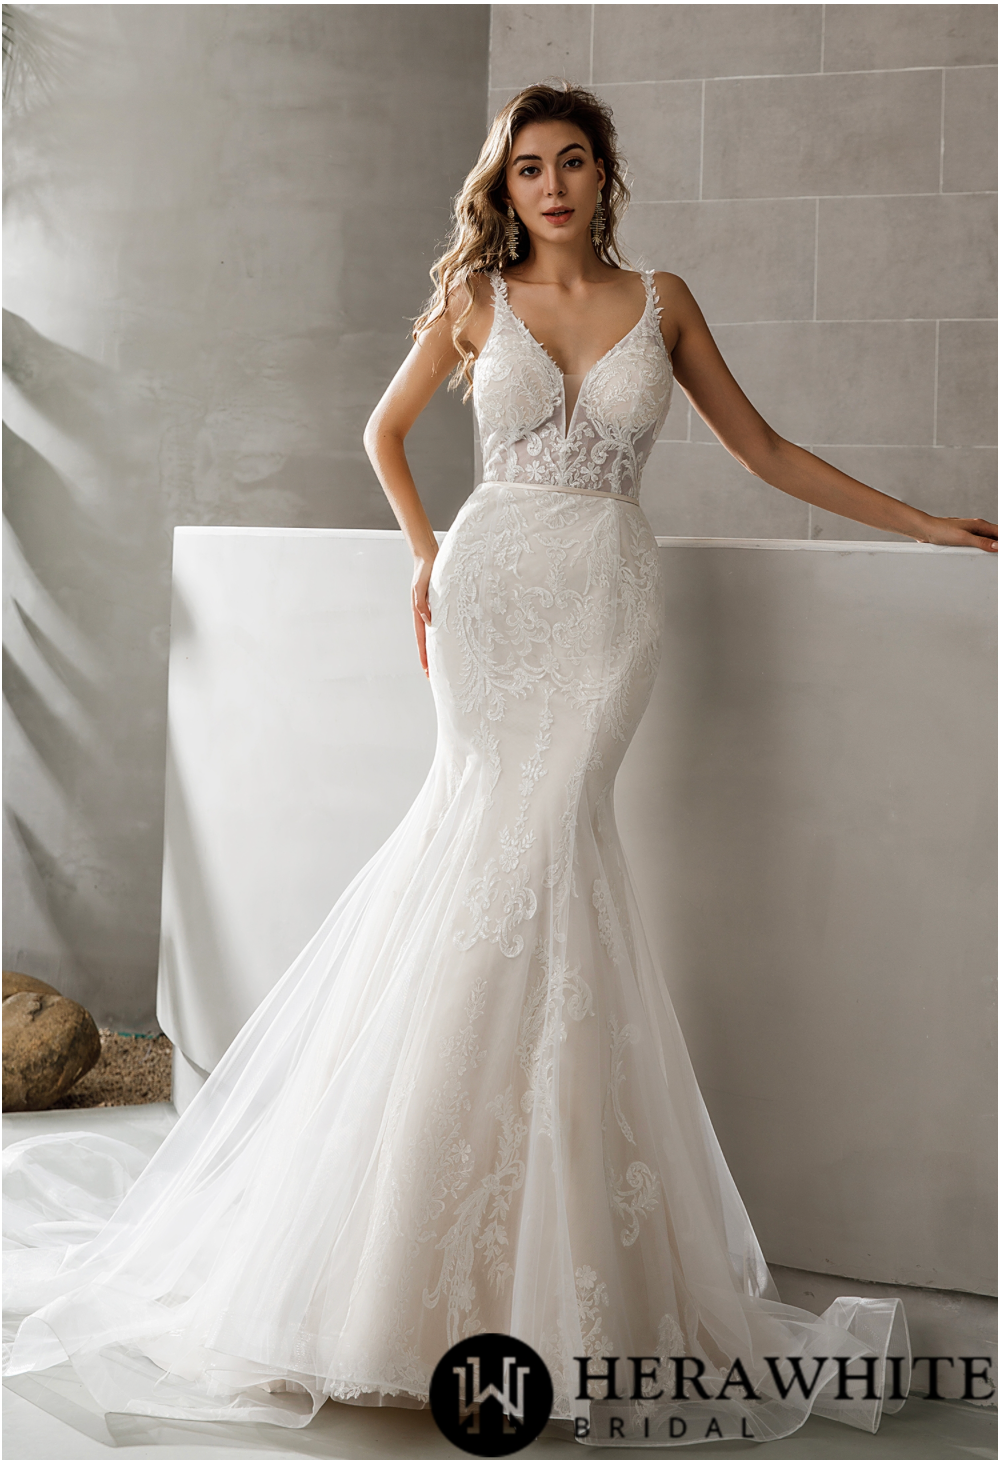 Geometric Lace Fit and Flare Bridal Gown With Sheer Train - Nolita Nicole